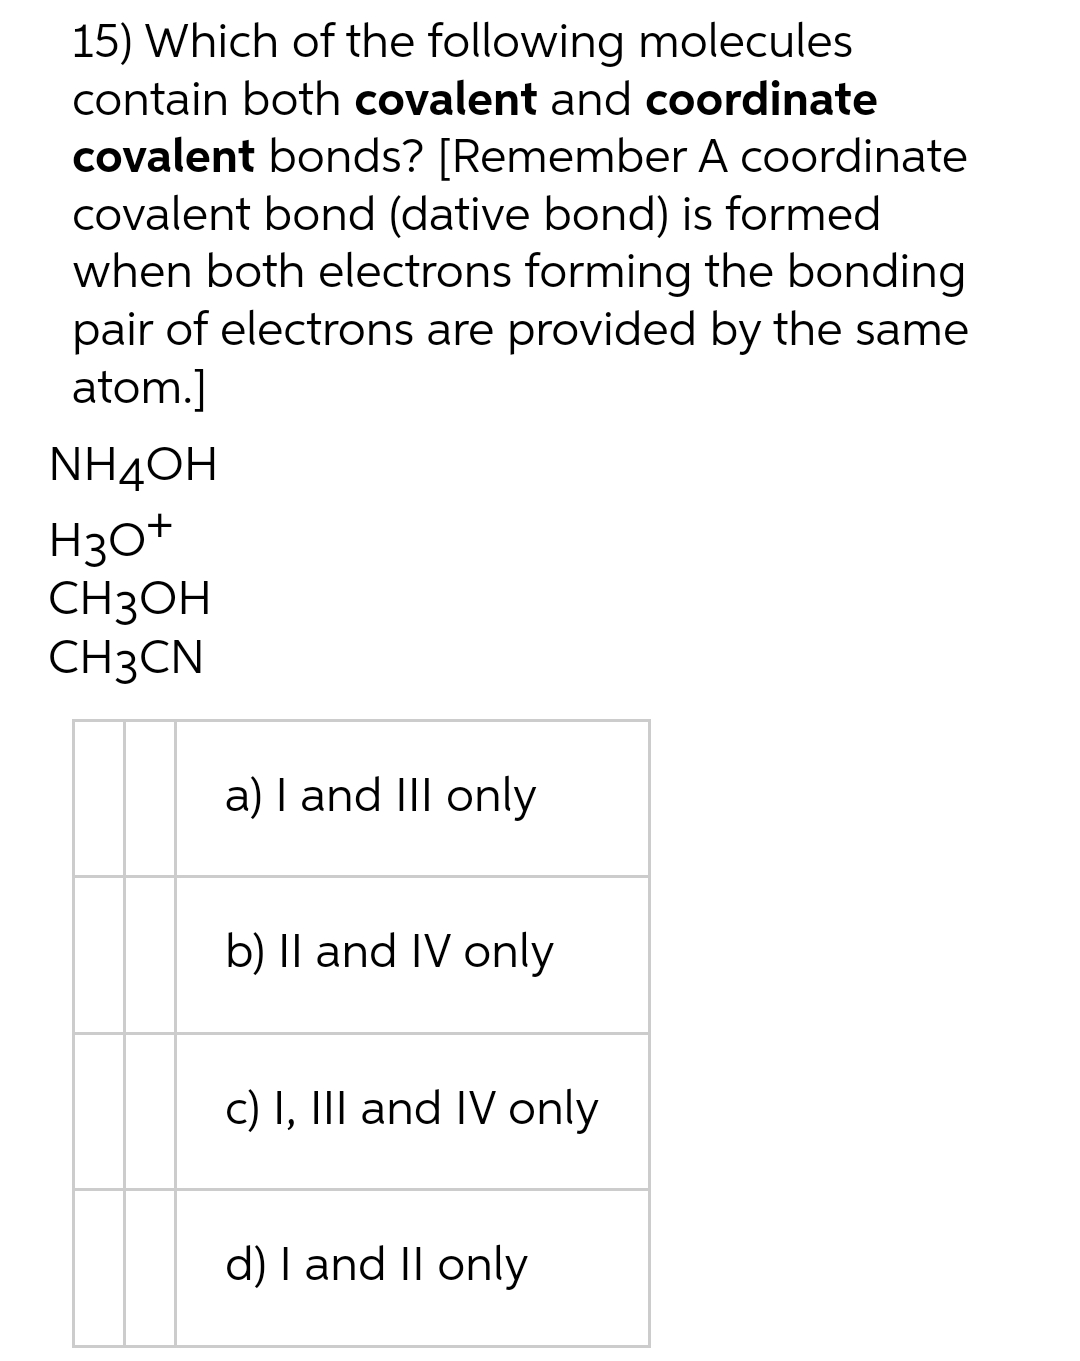 15) Which of the following molecules
contain both covalent and coordinate
covalent bonds? [Remember A coordinate
covalent bond (dative bond) is formed
when both electrons forming the bonding
pair of electrons are provided by the same
atom.]
NH4ОH
H30+
CH3OH
CH3CN
a) I and II only
b) II and IV only
c) I, III and IV only
d) I and II only
